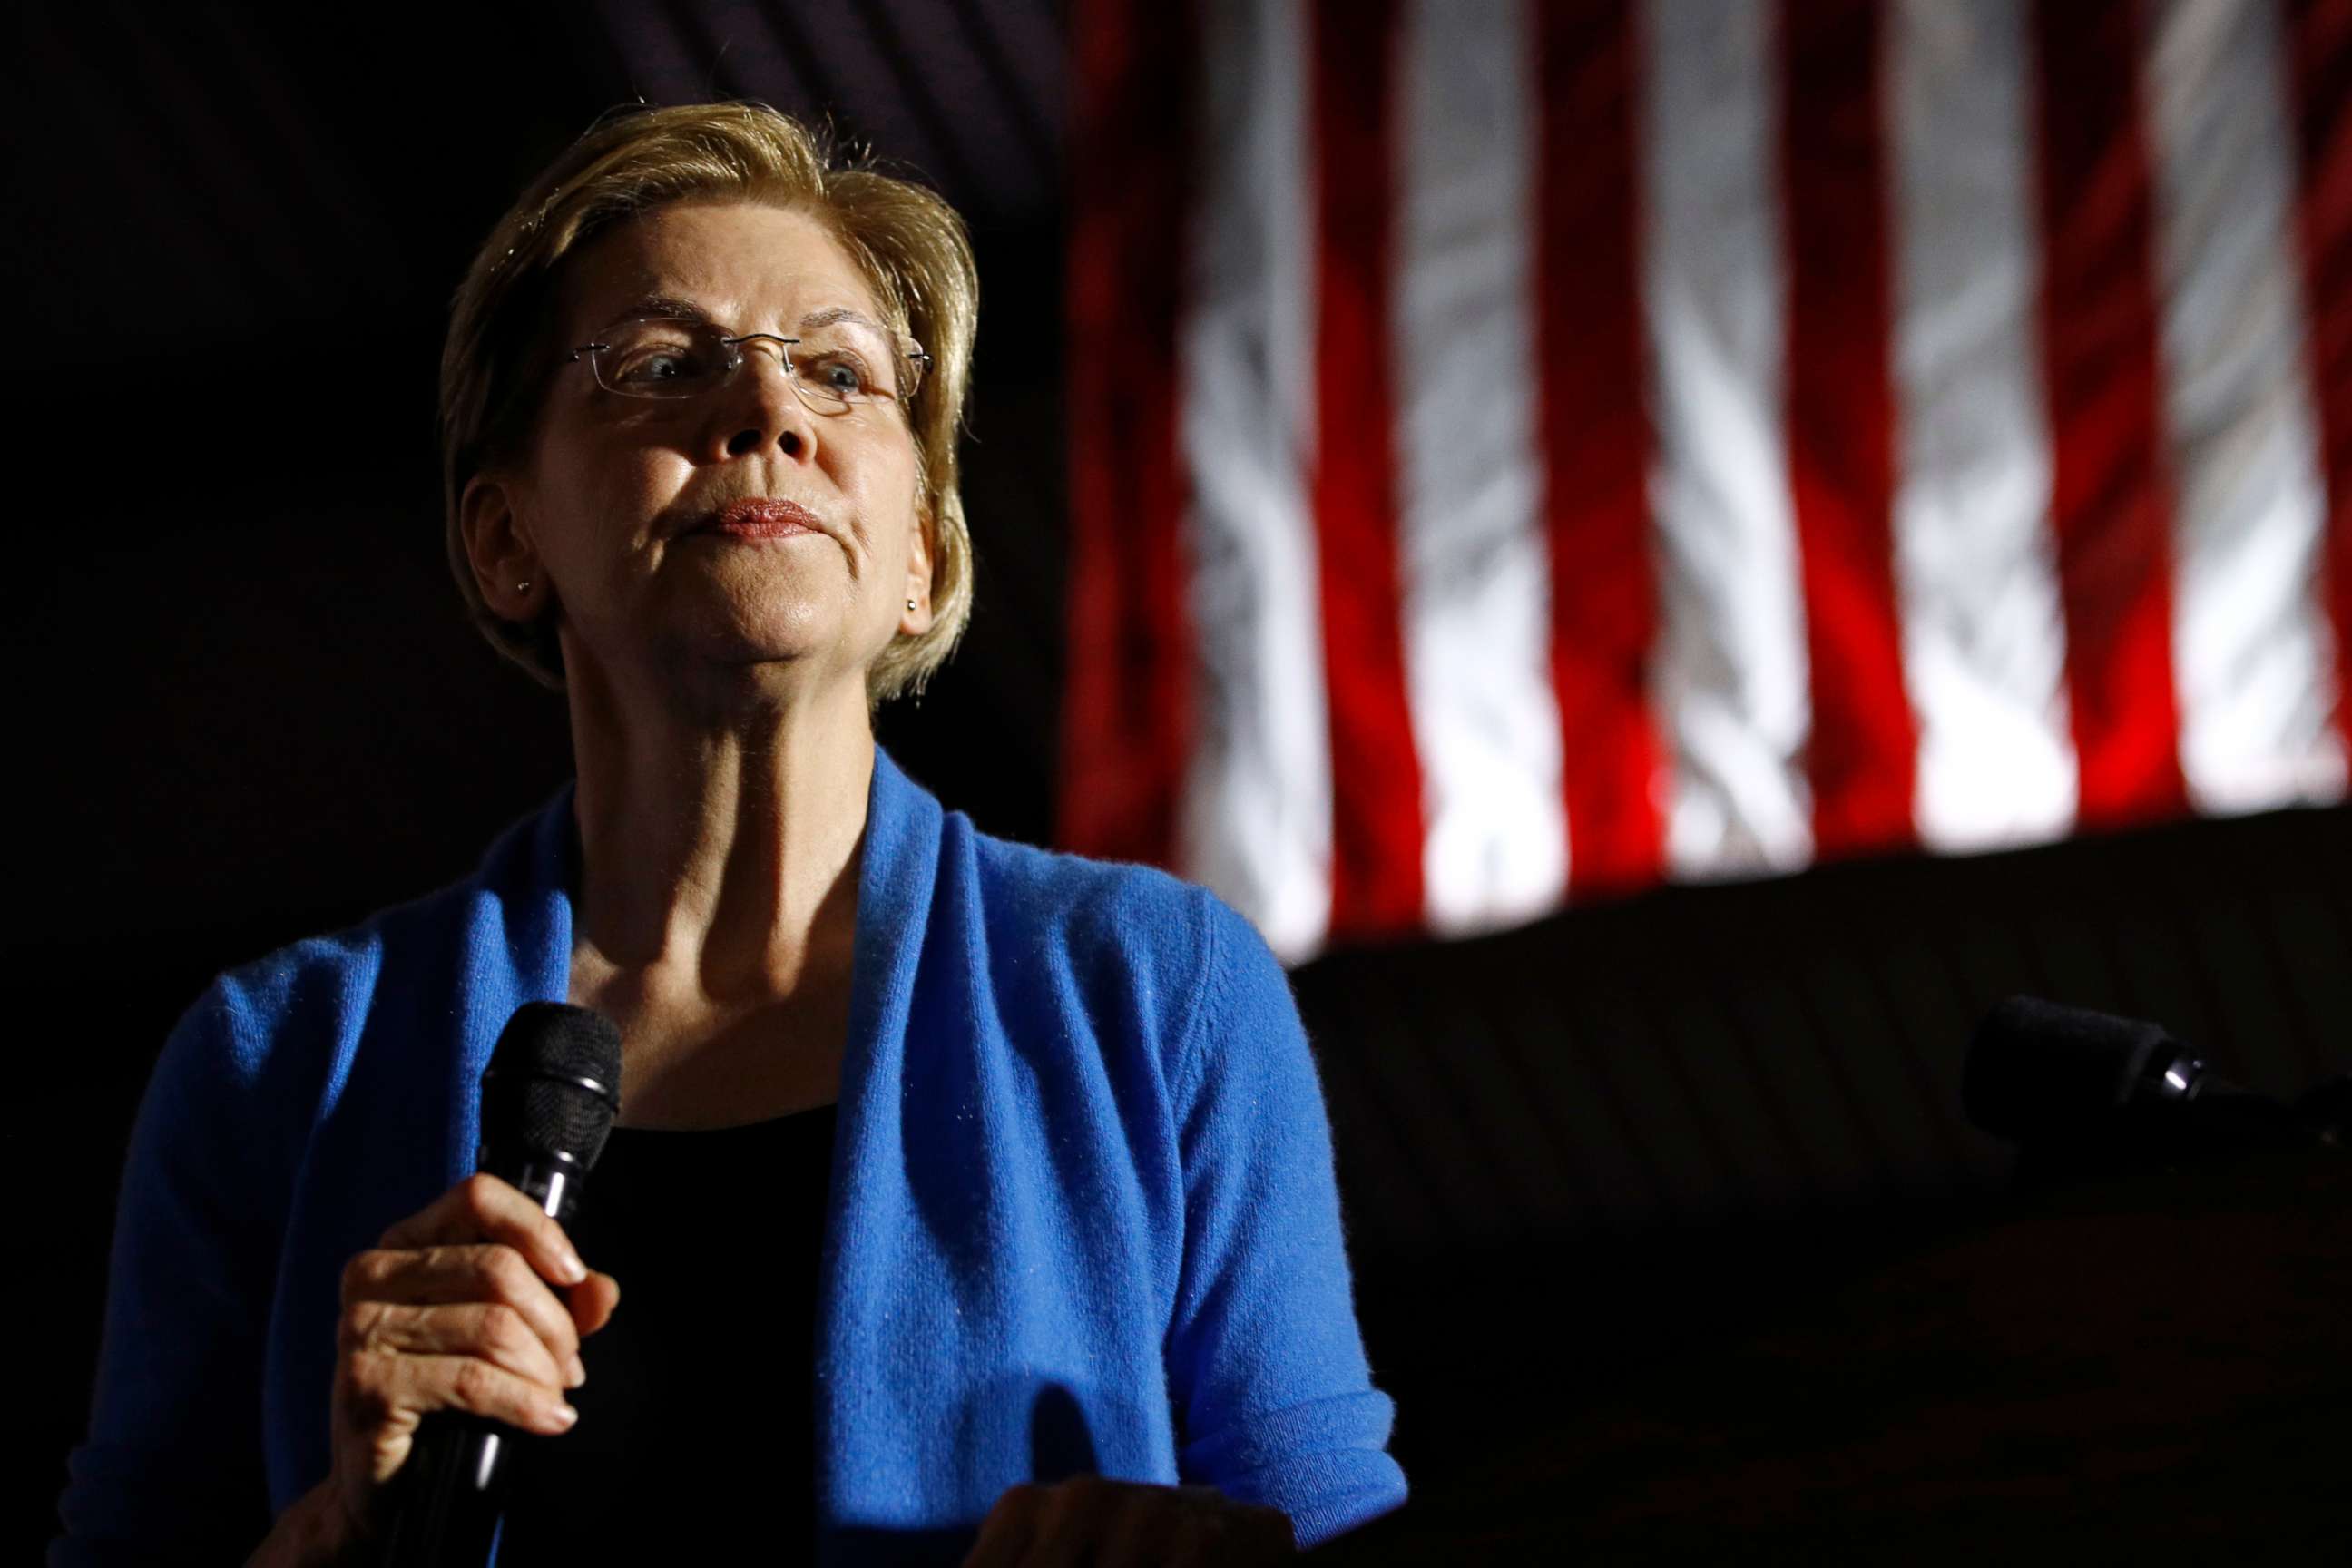 PHOTO: Democratic presidential candidate Sen. Elizabeth Warren speaks during a primary election night rally, March 3, 2020, at Eastern Market in Detroit.